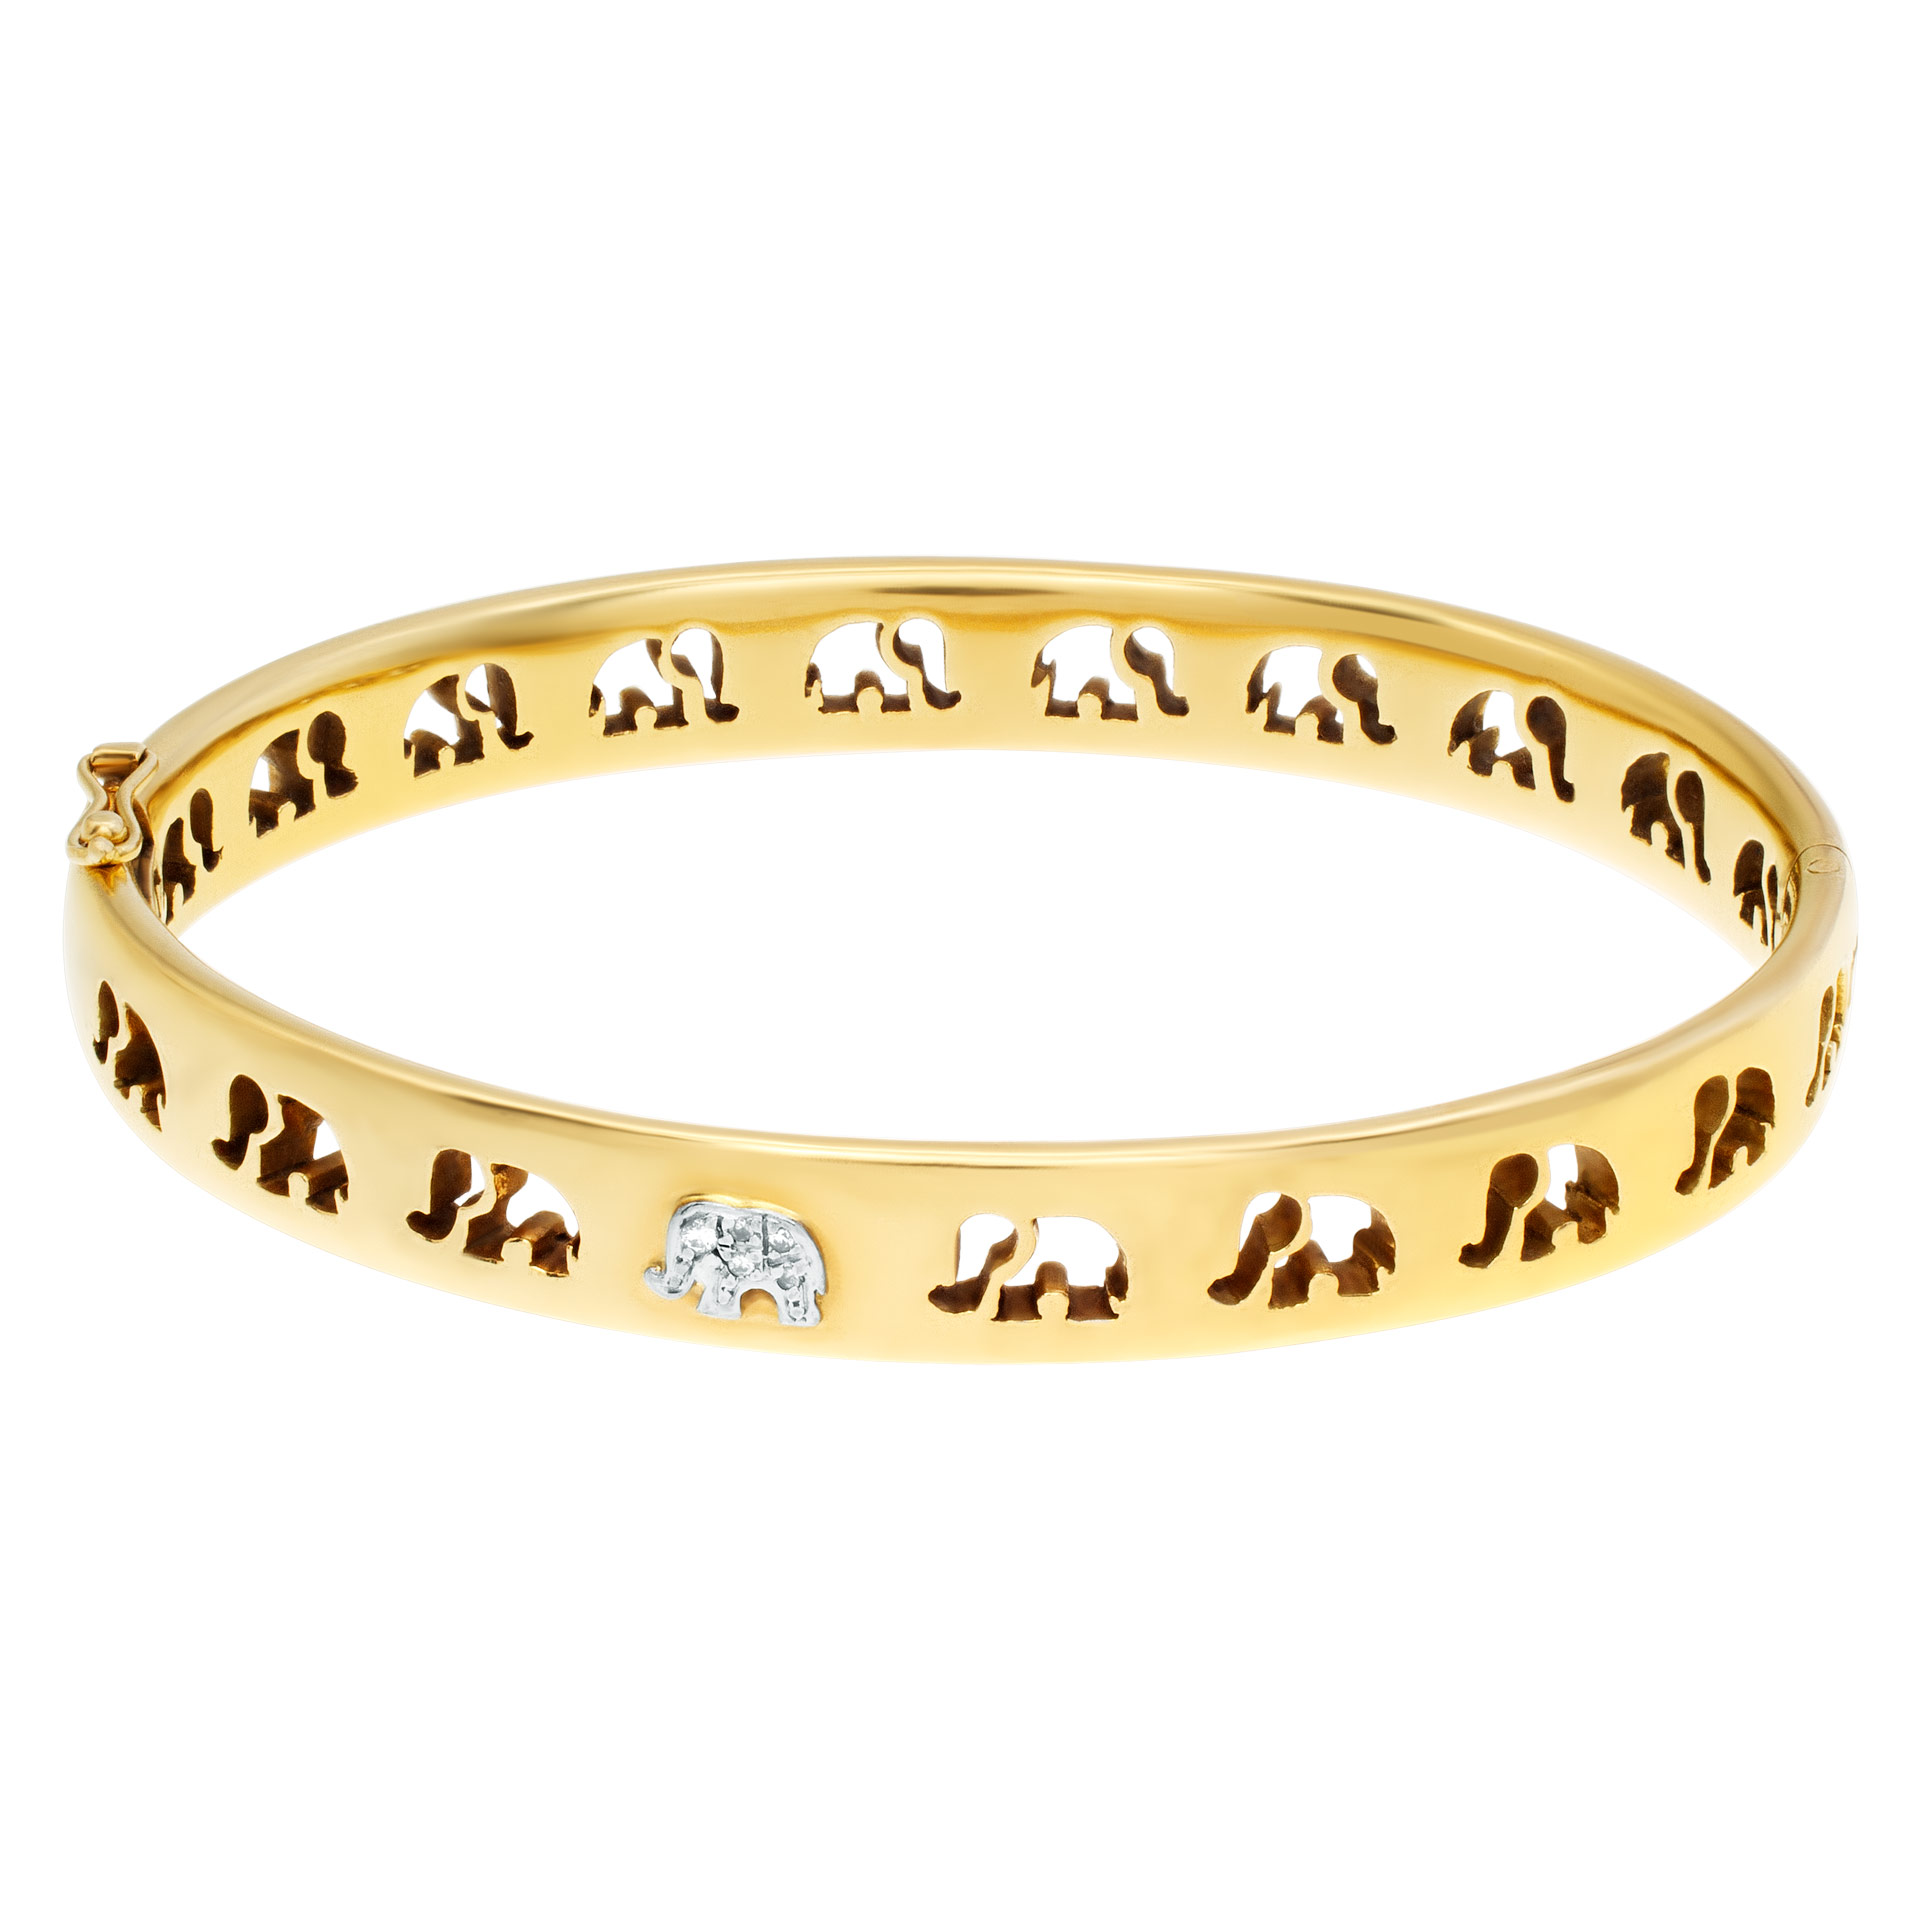 Signed "C'est Laudies" Elephant Bangle with diamond accents in 18K Yellow gold .